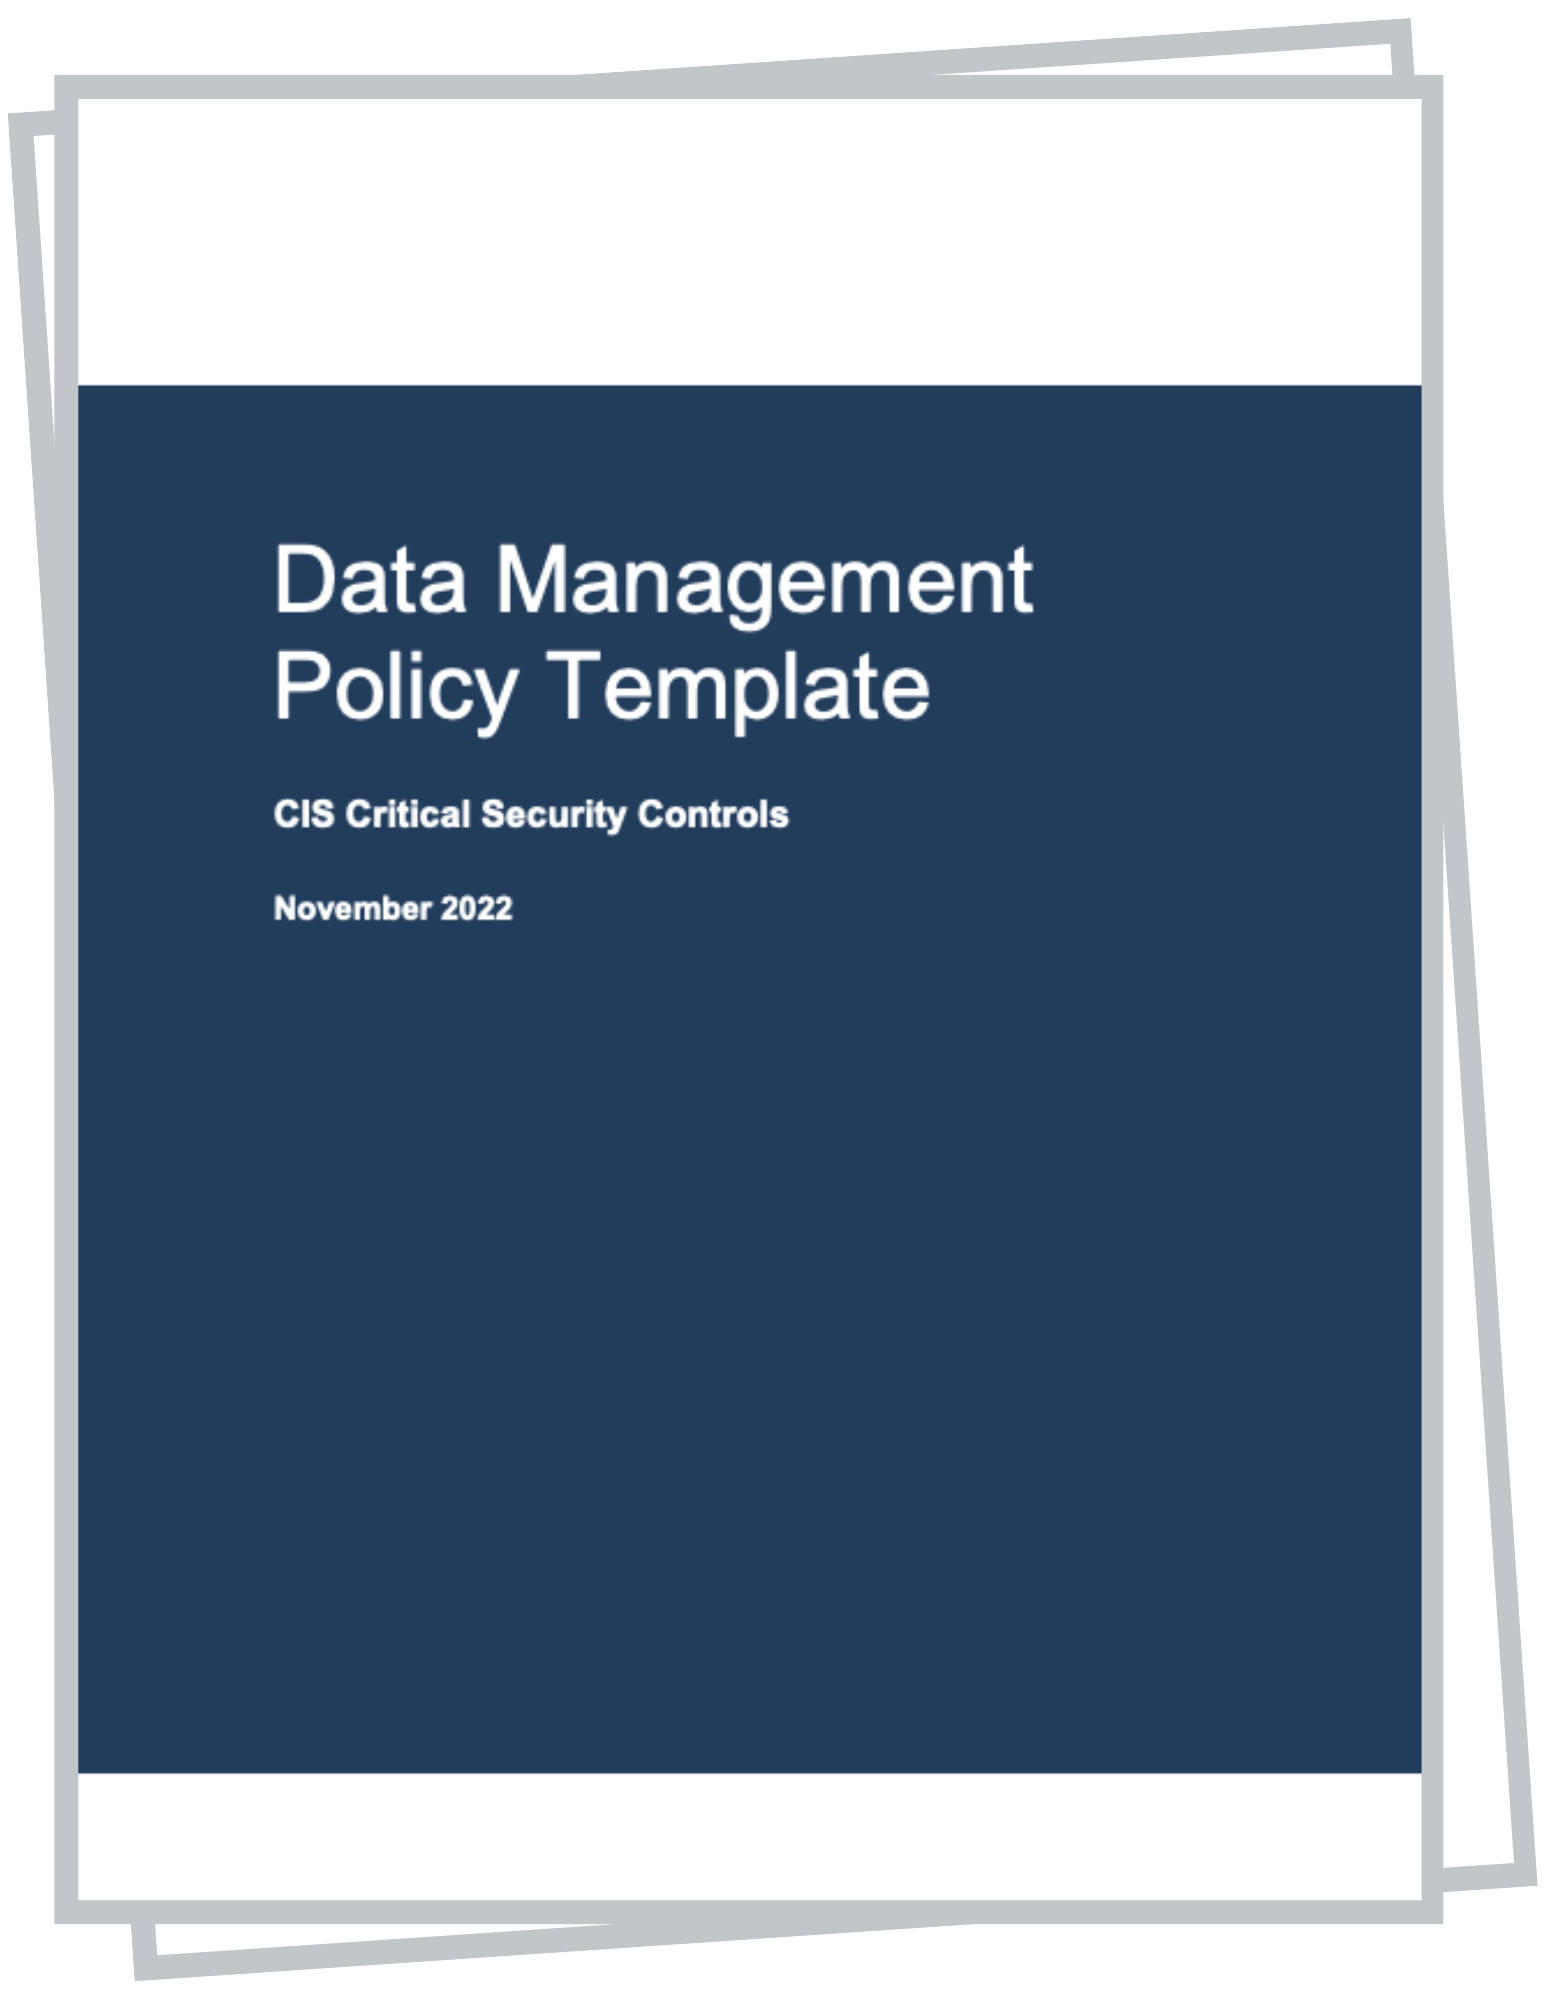 Data Management Policy Template for CIS Control 3